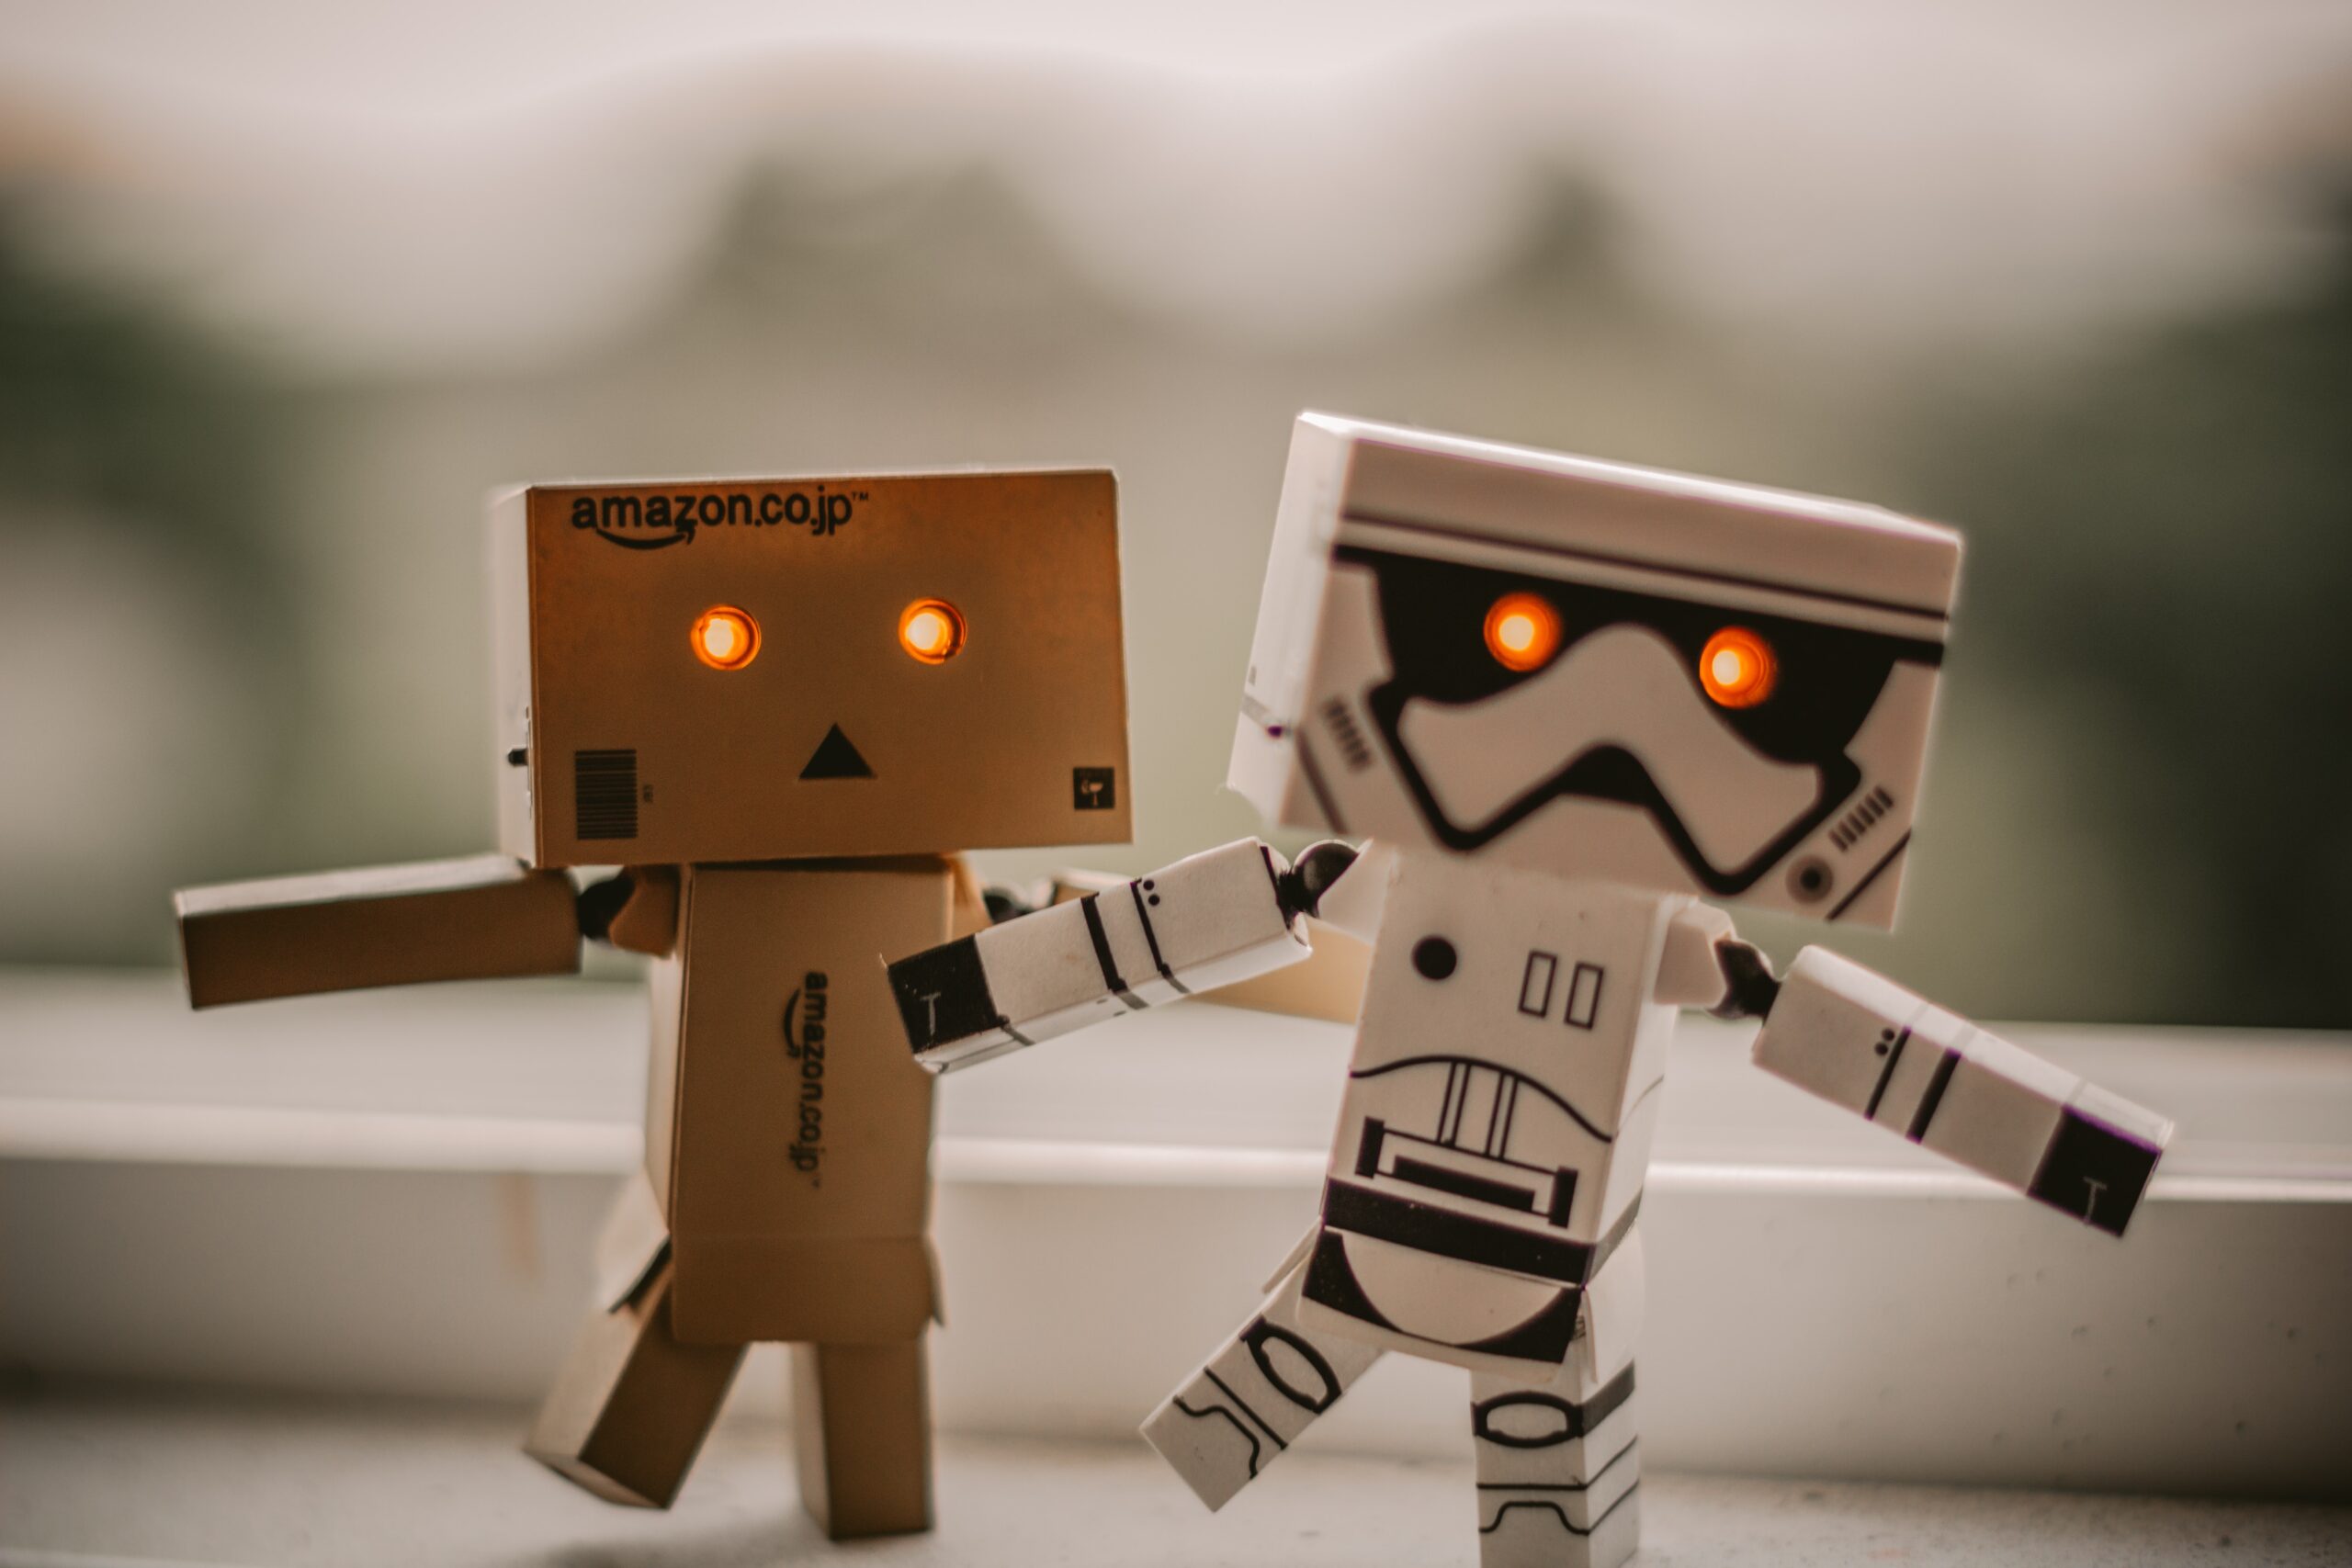 Cardboard androids walking with glowing eyes